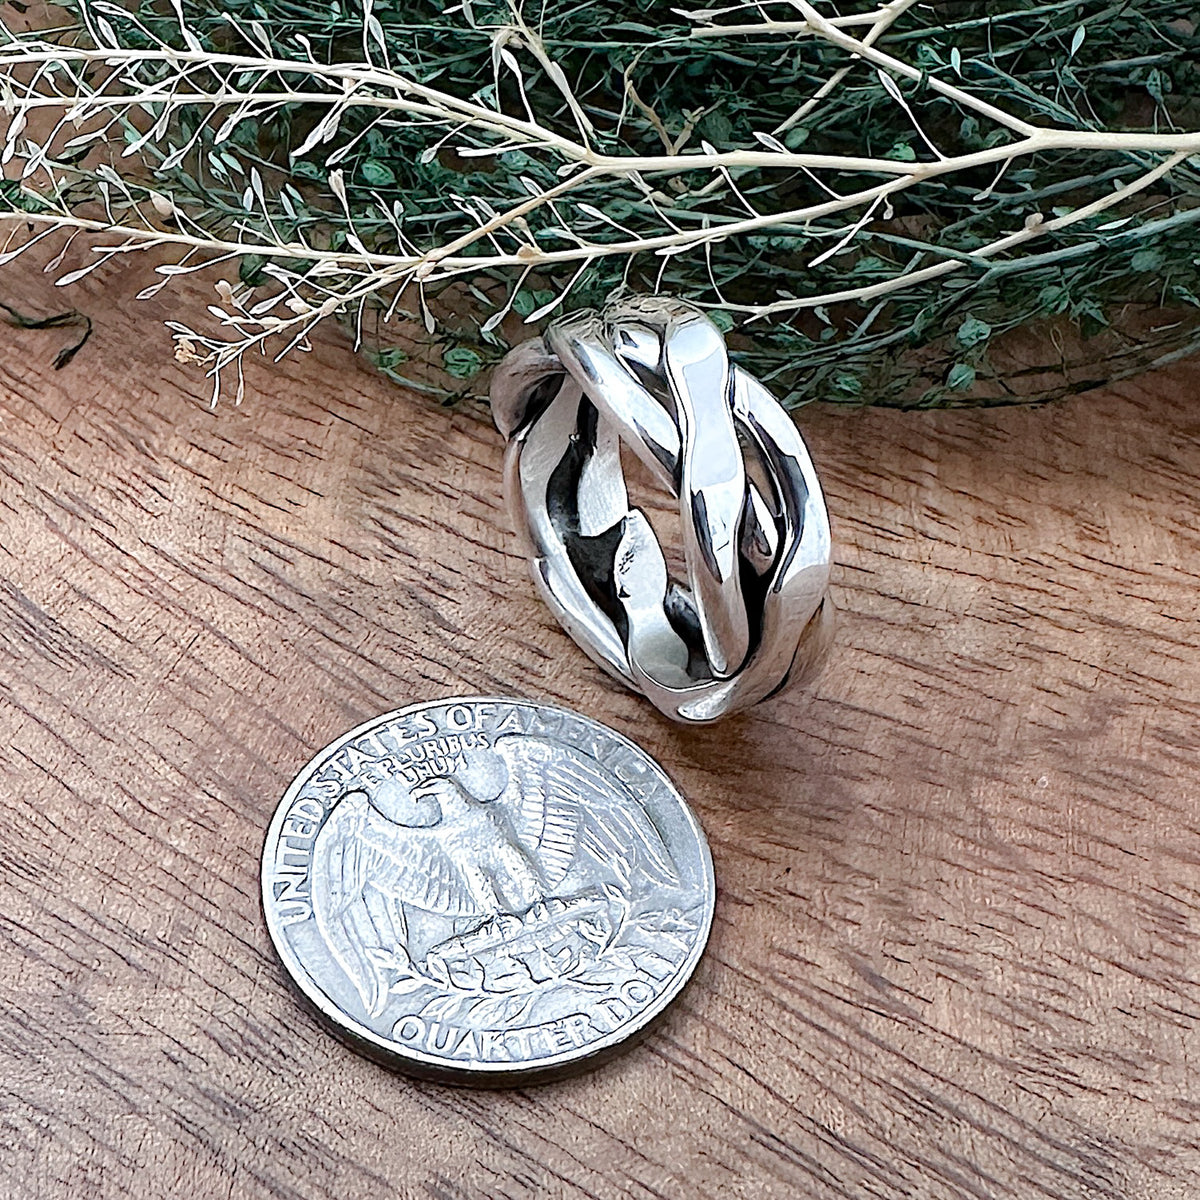 Comparison shot of a US quarter coin and a sterling silver braided ring